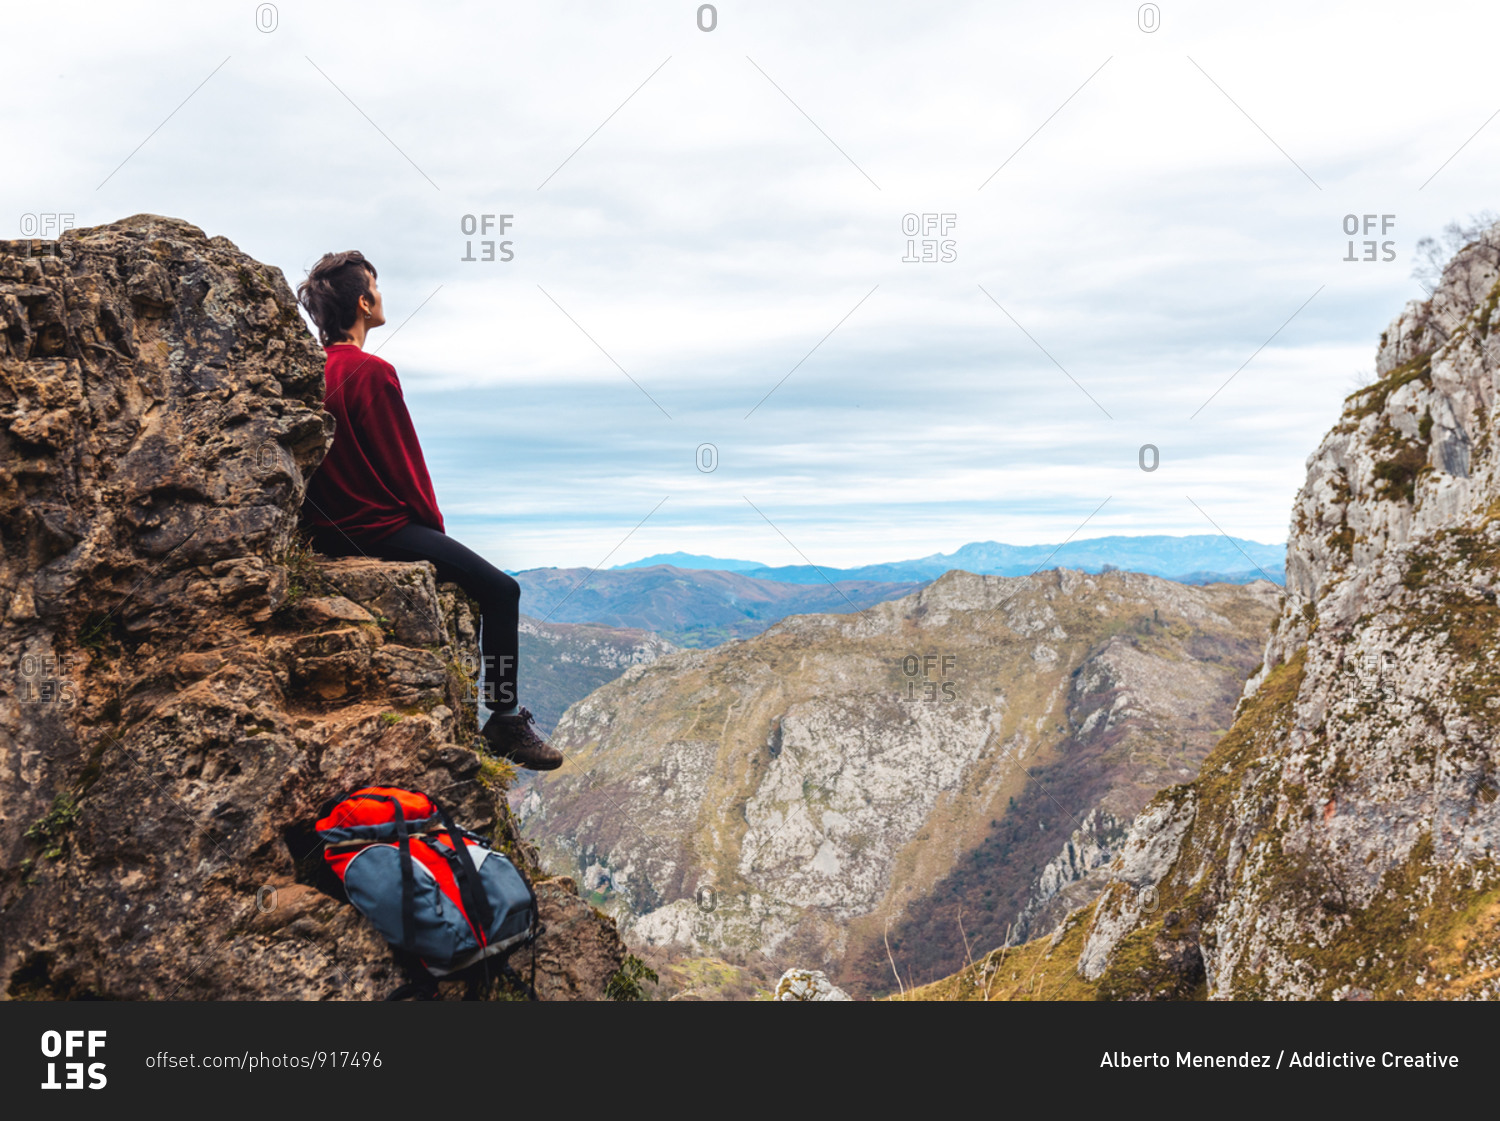 Side view of tourist sitting on edge of cliff enjoying freedom and admiring amazing scenery of countryside located in valley at mountain foothill against foggy forested hills and plain under sky with lush gray clouds in Spain